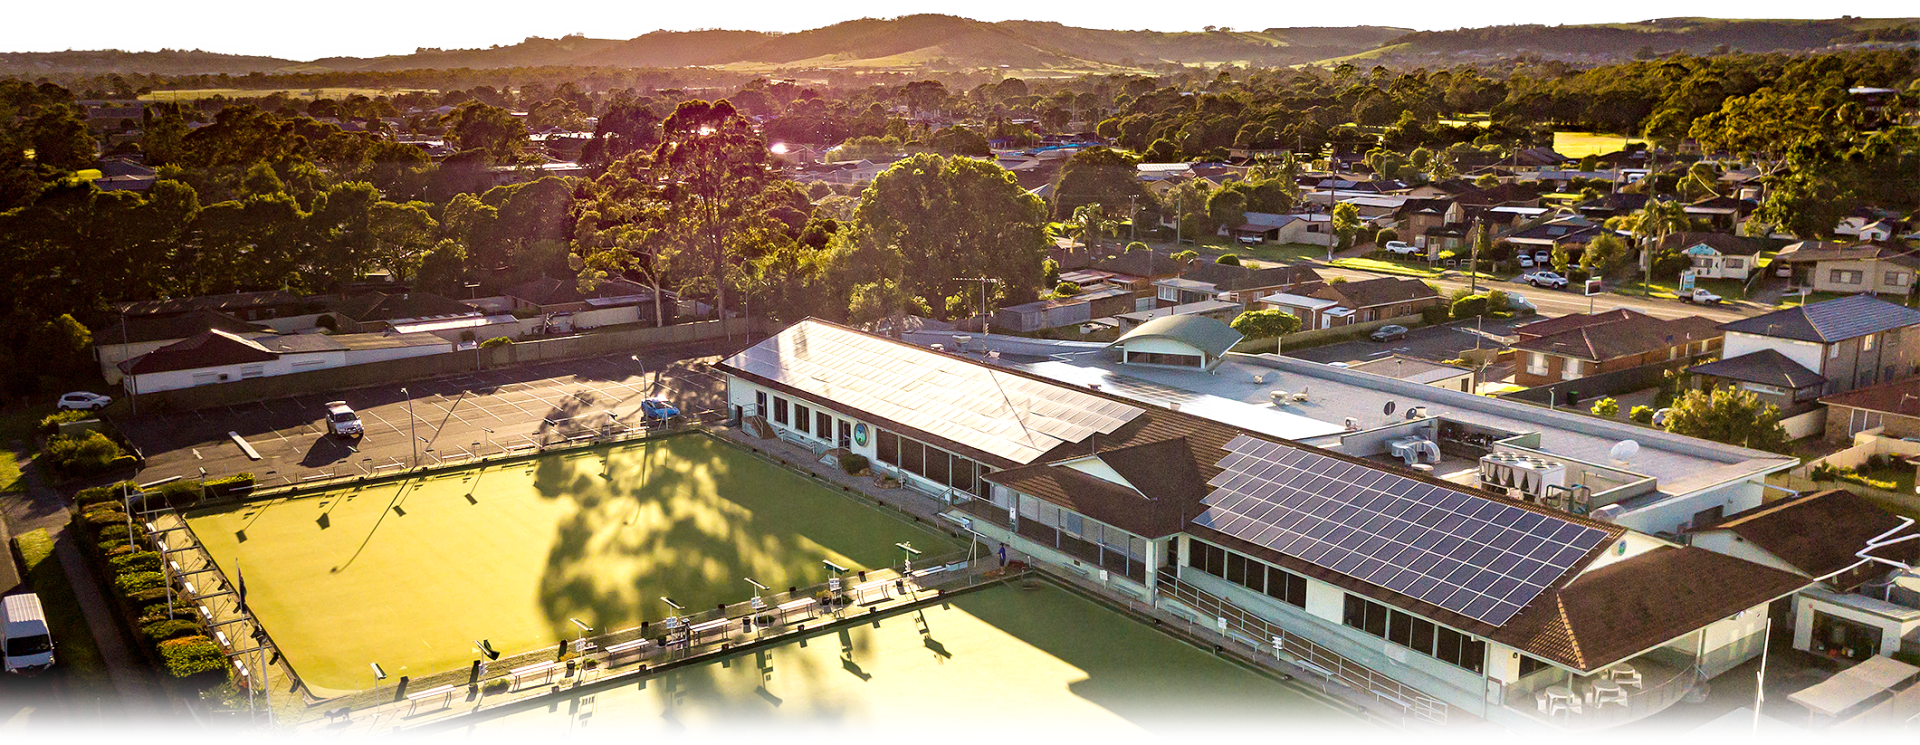 aerial view of Albion Park Bowling Club in Shellharbour